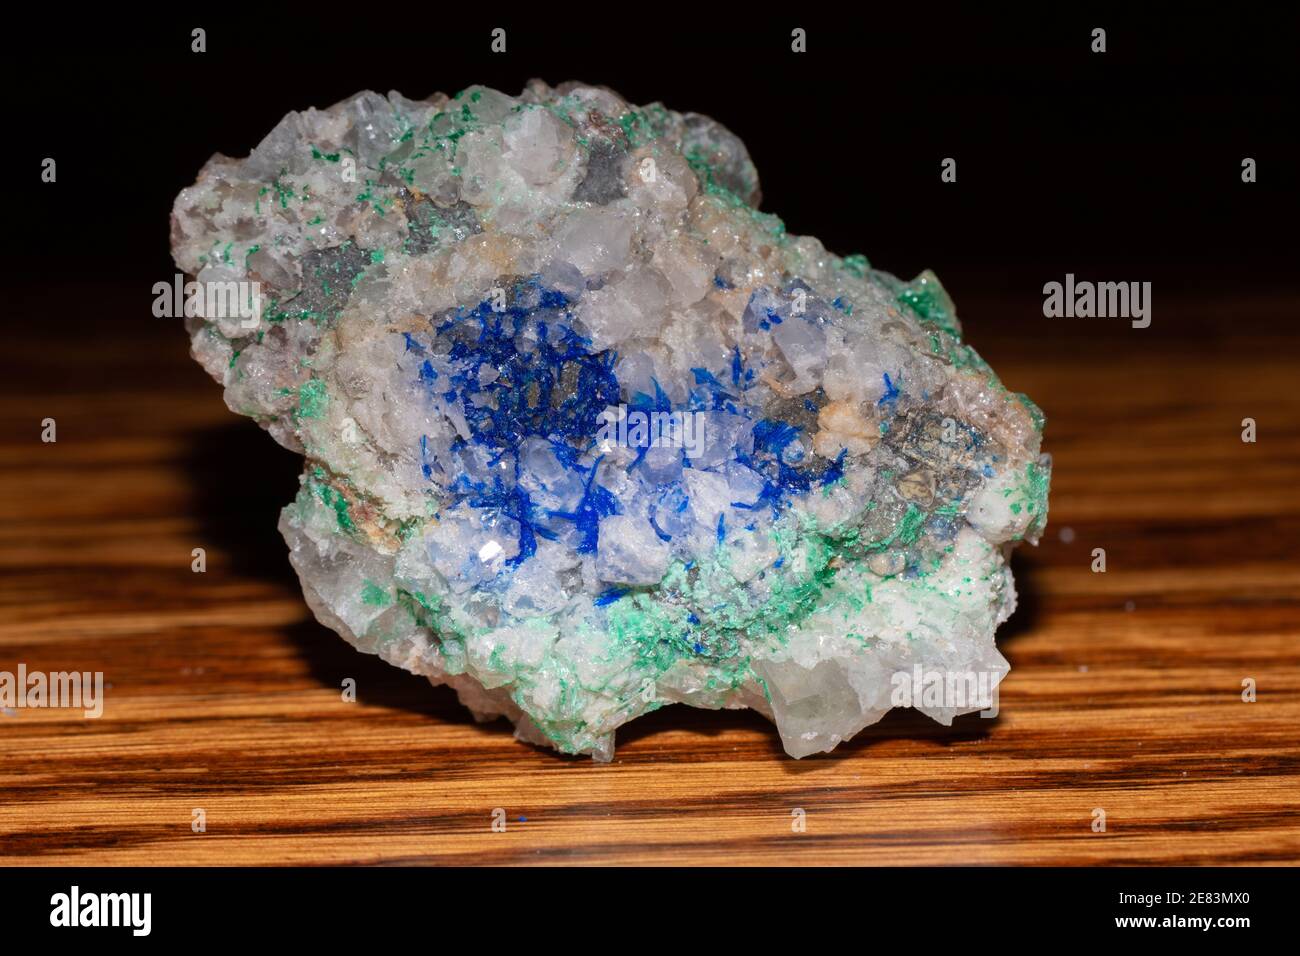 Linarite on Quartz, with Fluorite From Blanchard Mine in New Mexico Stock Photo